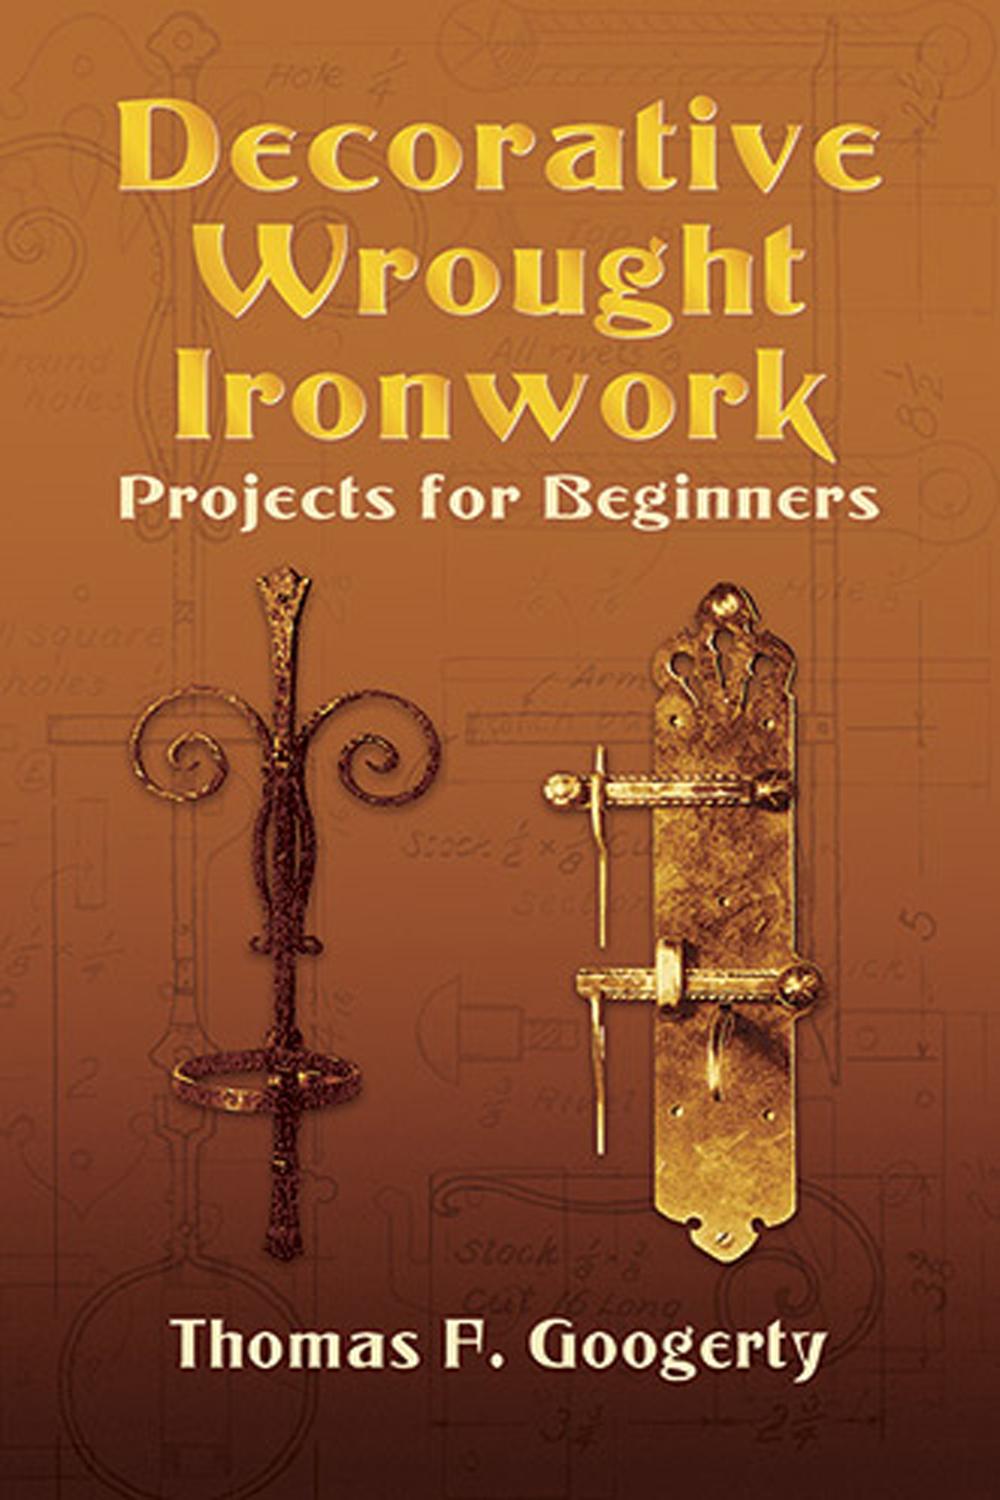 Decorative Wrought Ironwork Projects for Beginners - Thomas F. Googerty